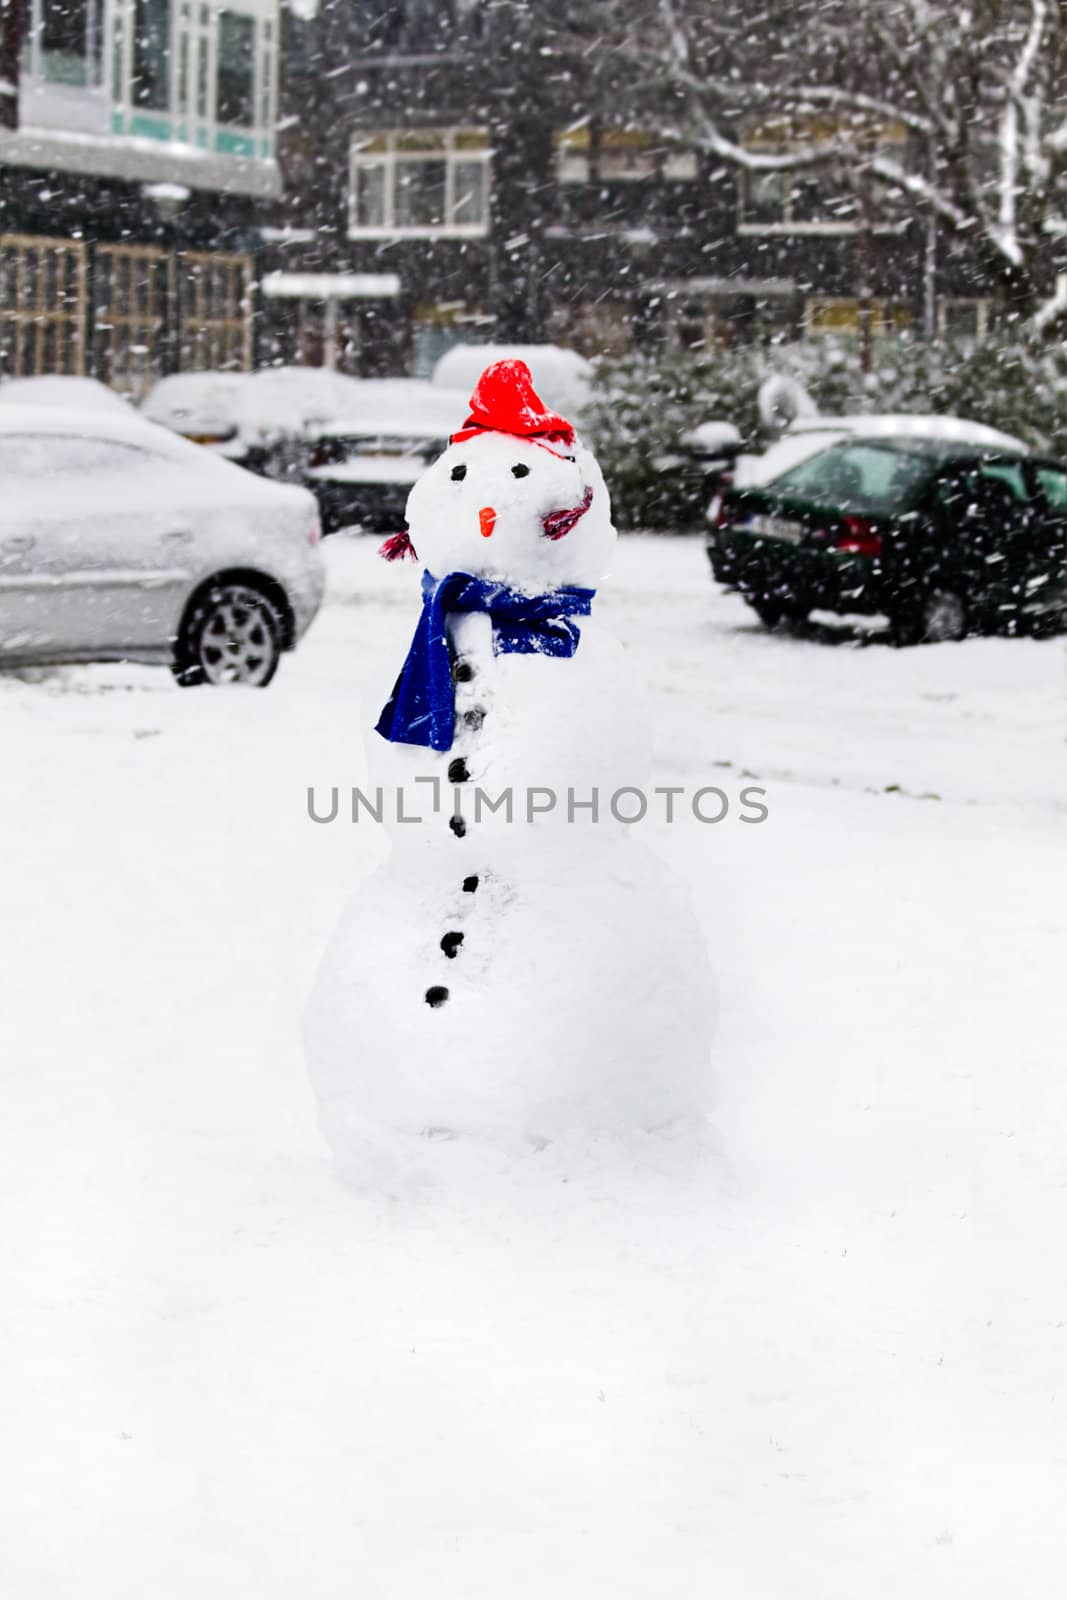 Snow in the city - Snowman in snowstorm